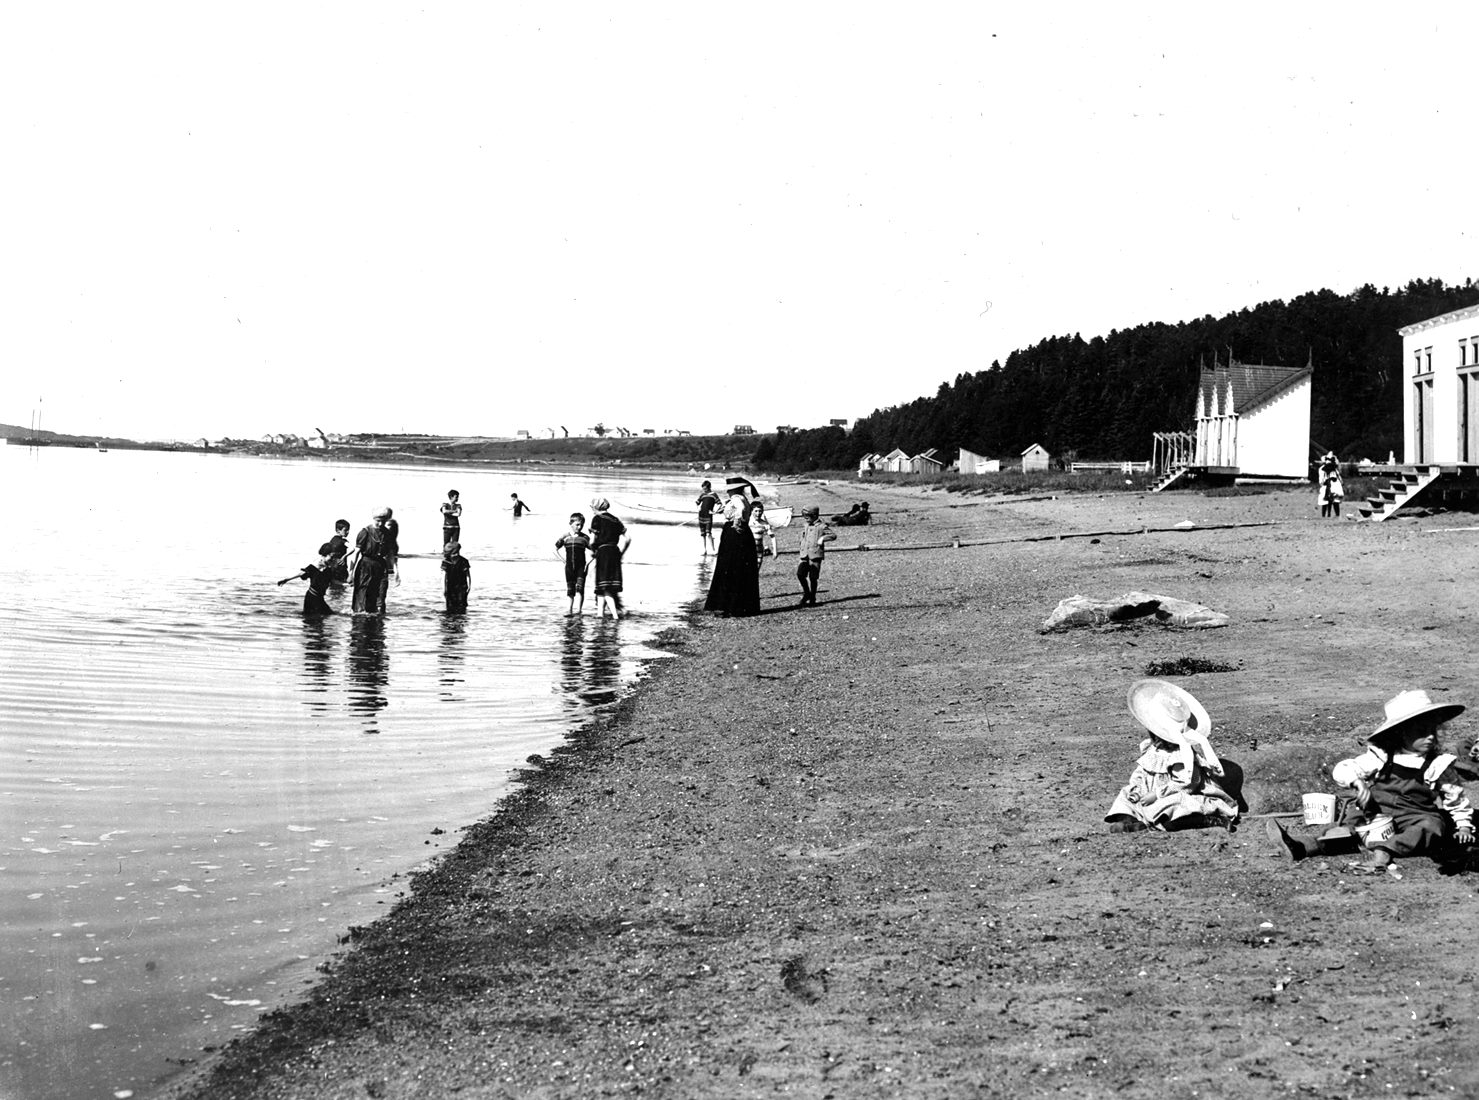 Women and children enjoying the beach, two children playing in the sand, and sea-bathers wearing long bathing suits.